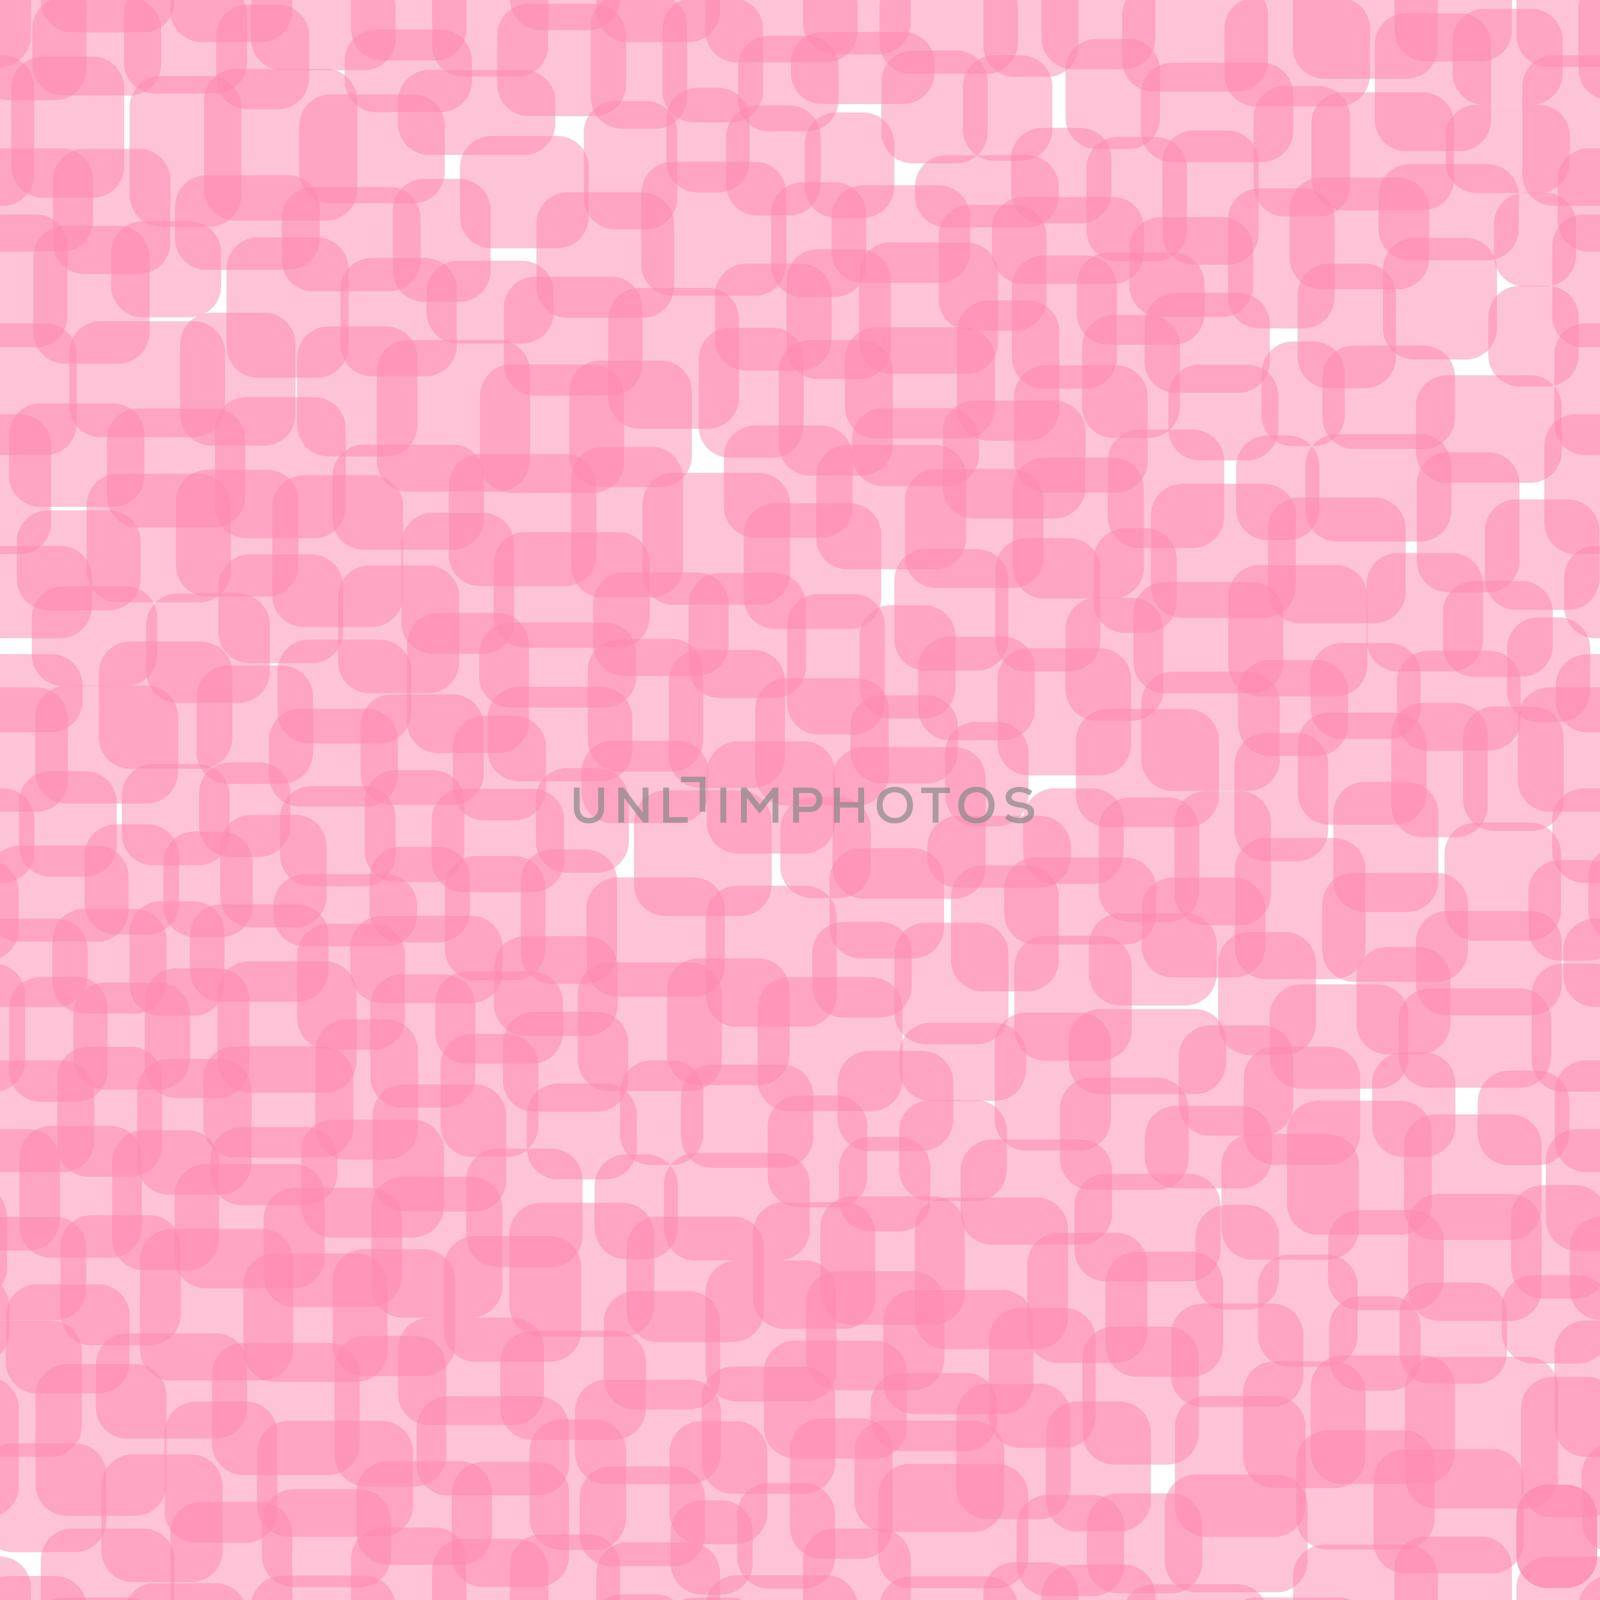 Abstract pink squares on white background. Seamless pattern with geometric print for wallpaper, web page, textures, card, postcard, faric, textile. Stylish ornament. Decorative vector illustration.